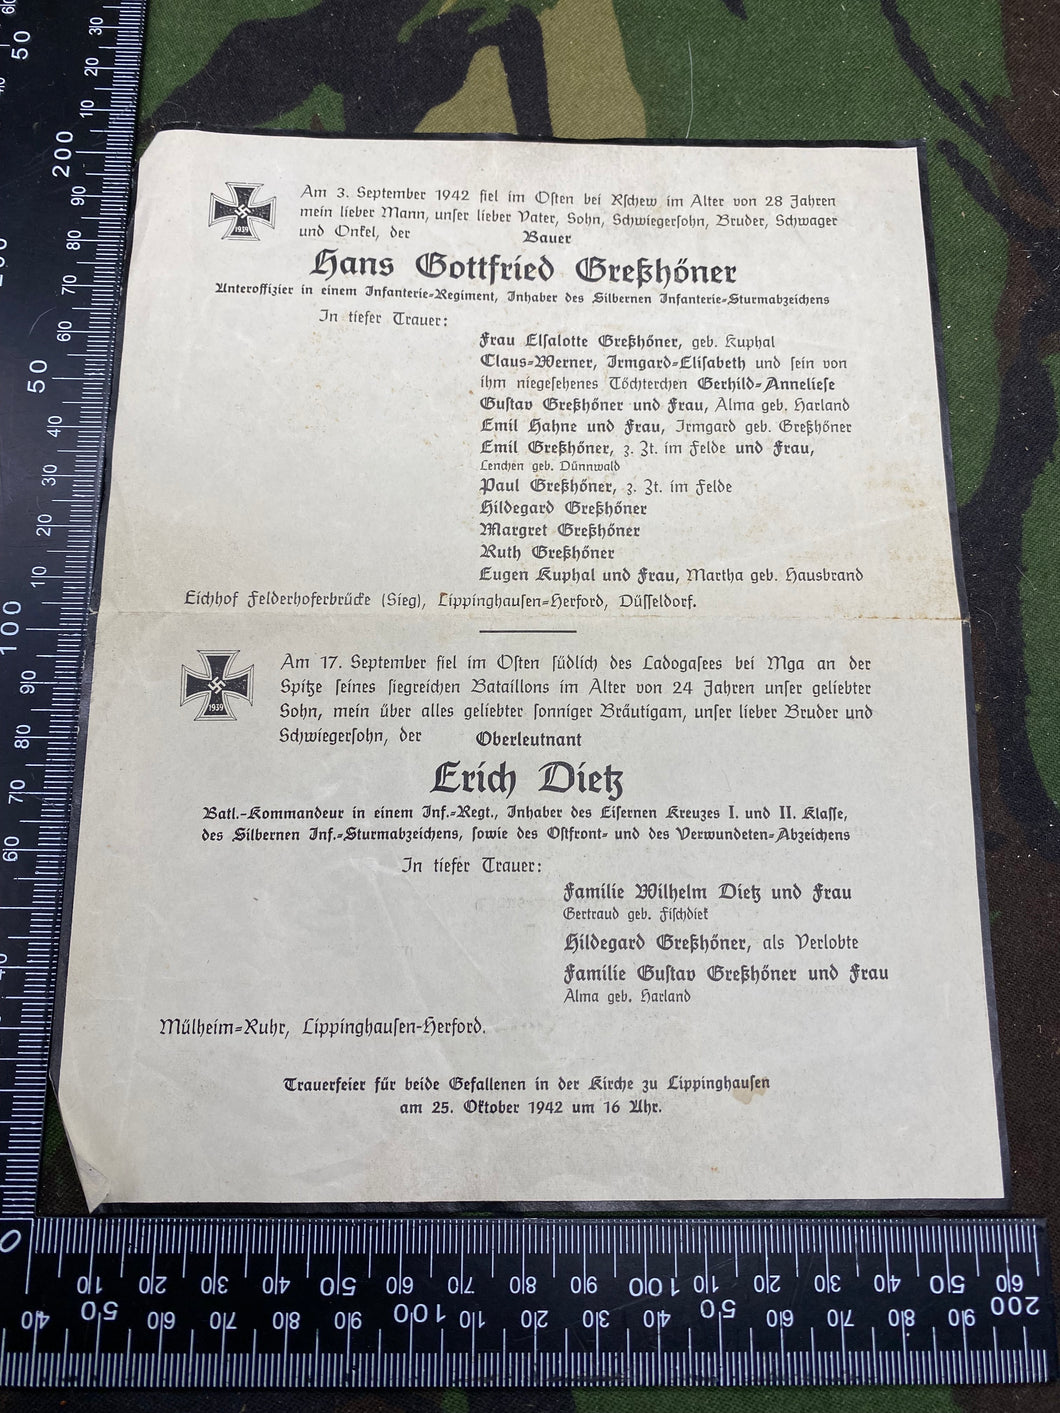 Copy of WW2 German Army Death Notice / Card for Two Soldiers - Family Members